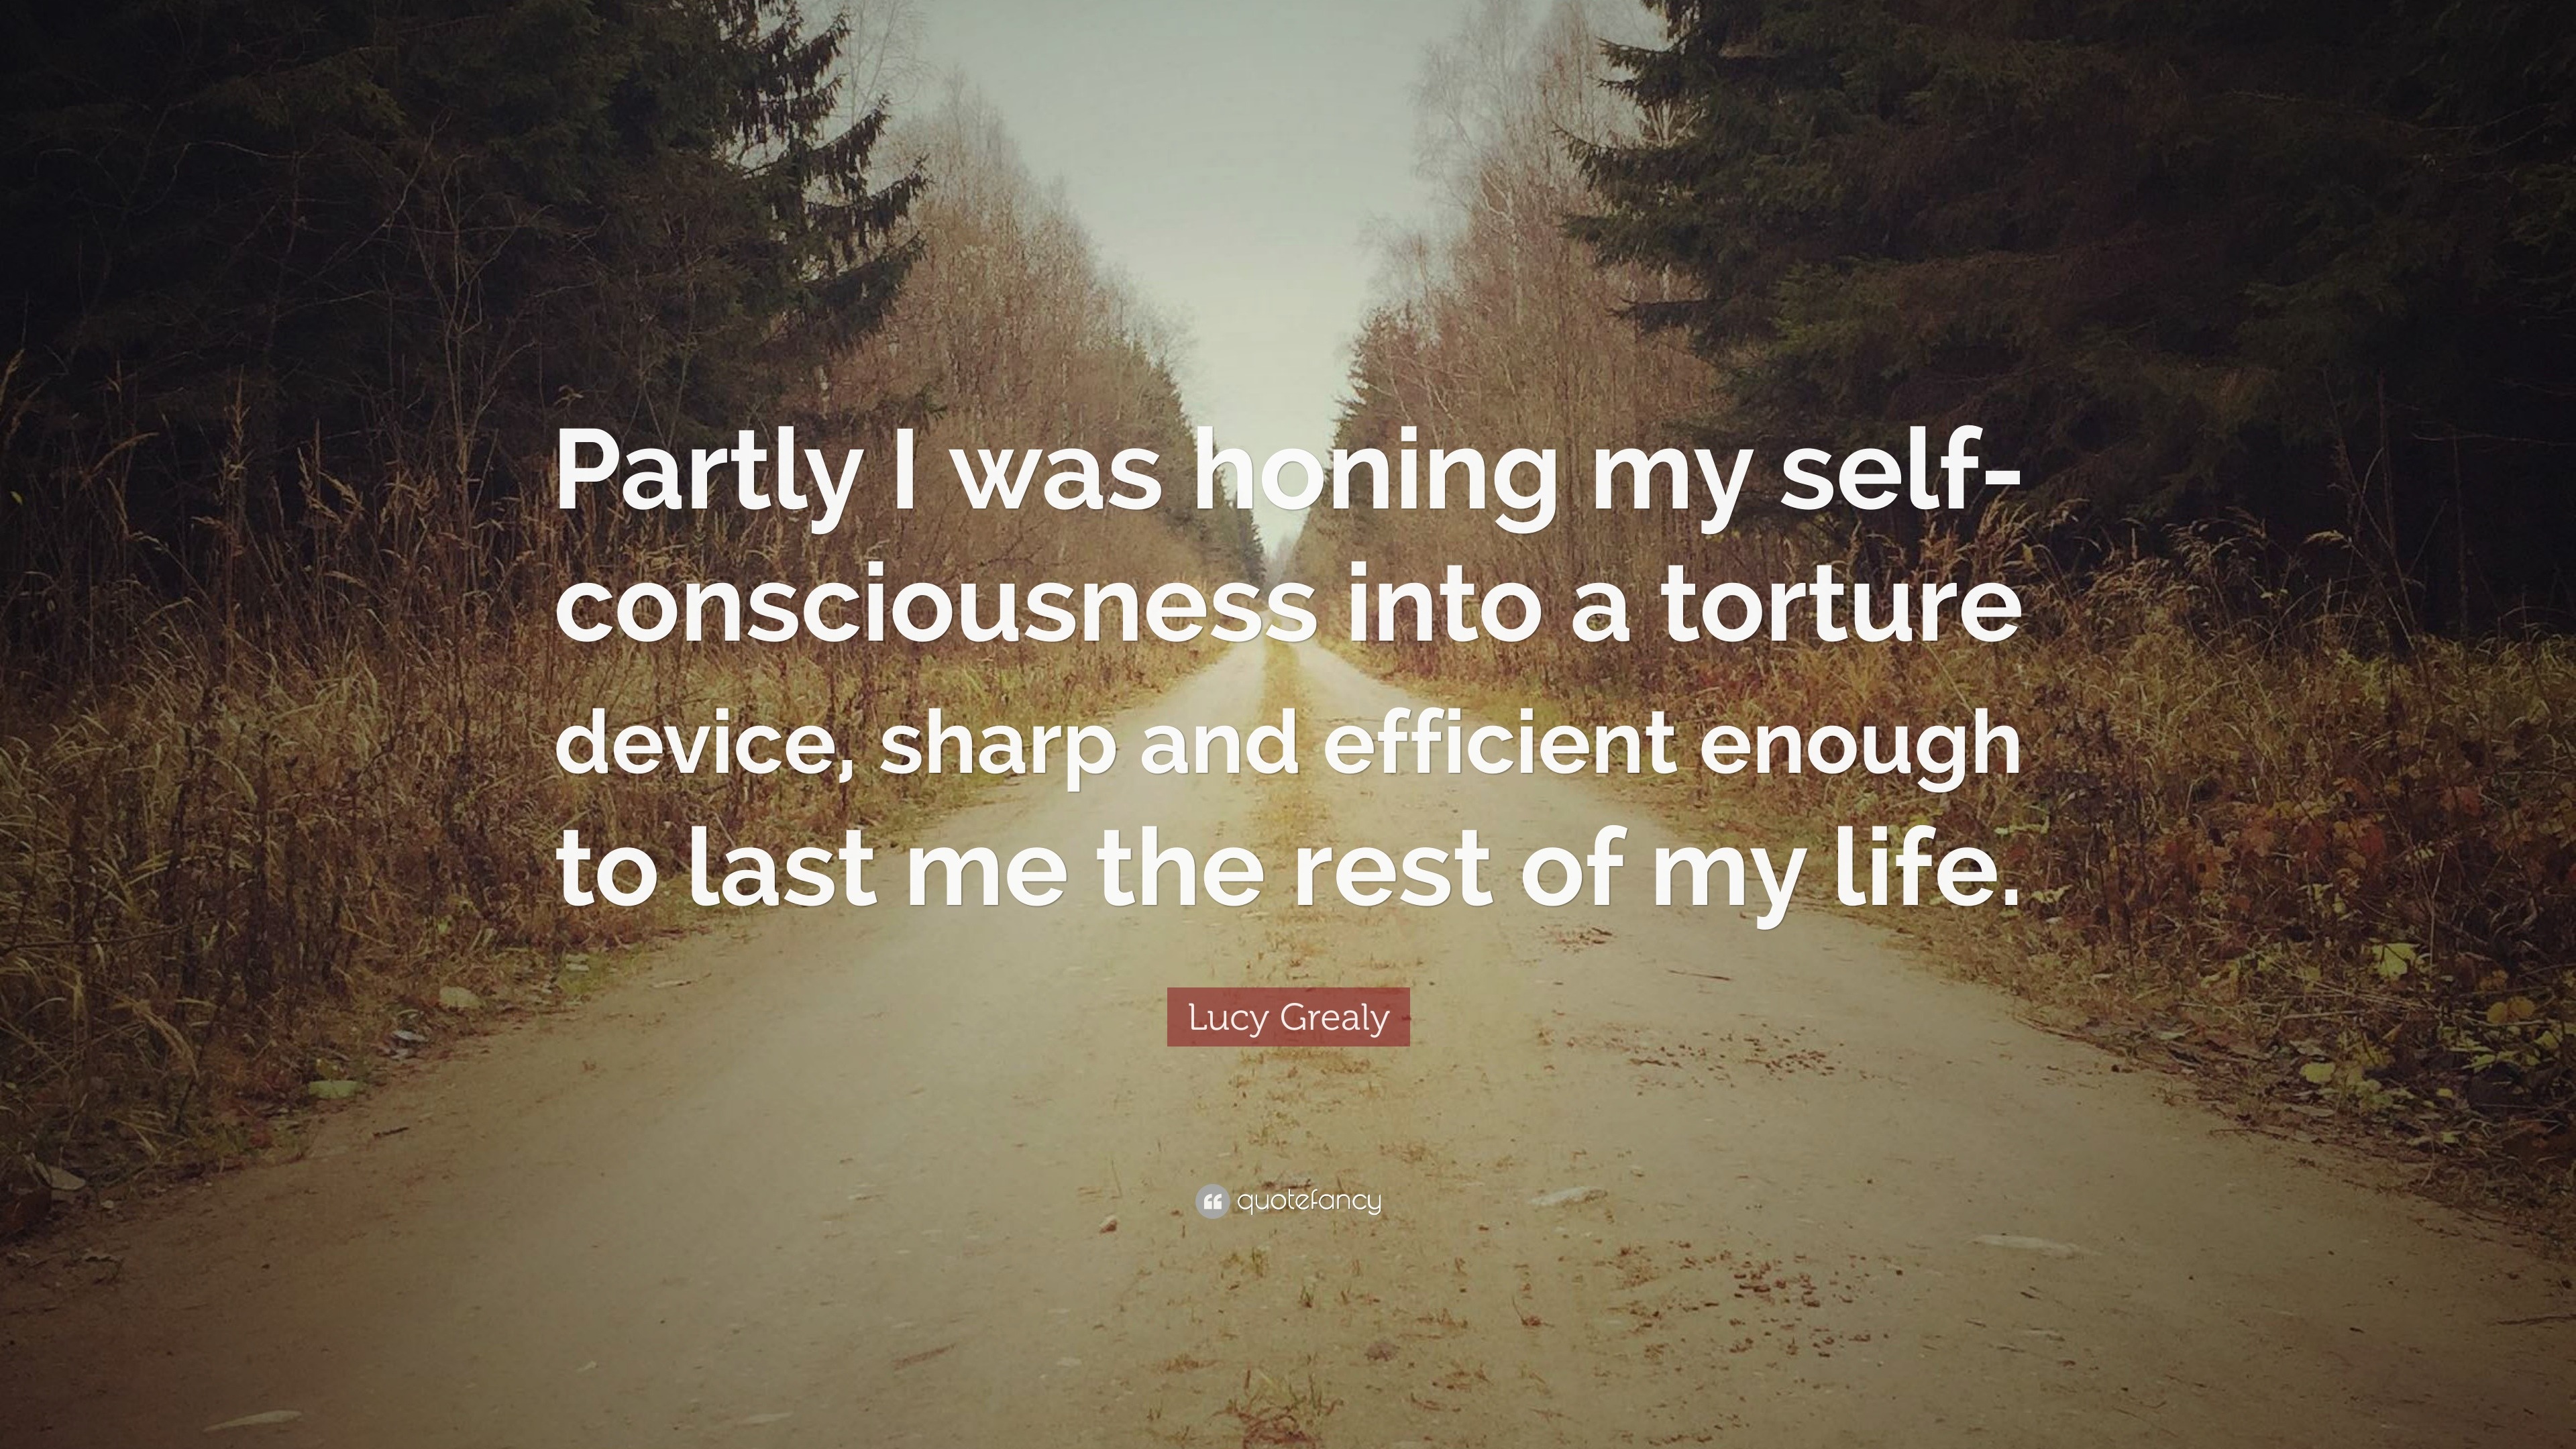 Lucy Grealy Quote: “Partly I was honing my self-consciousness into a ...